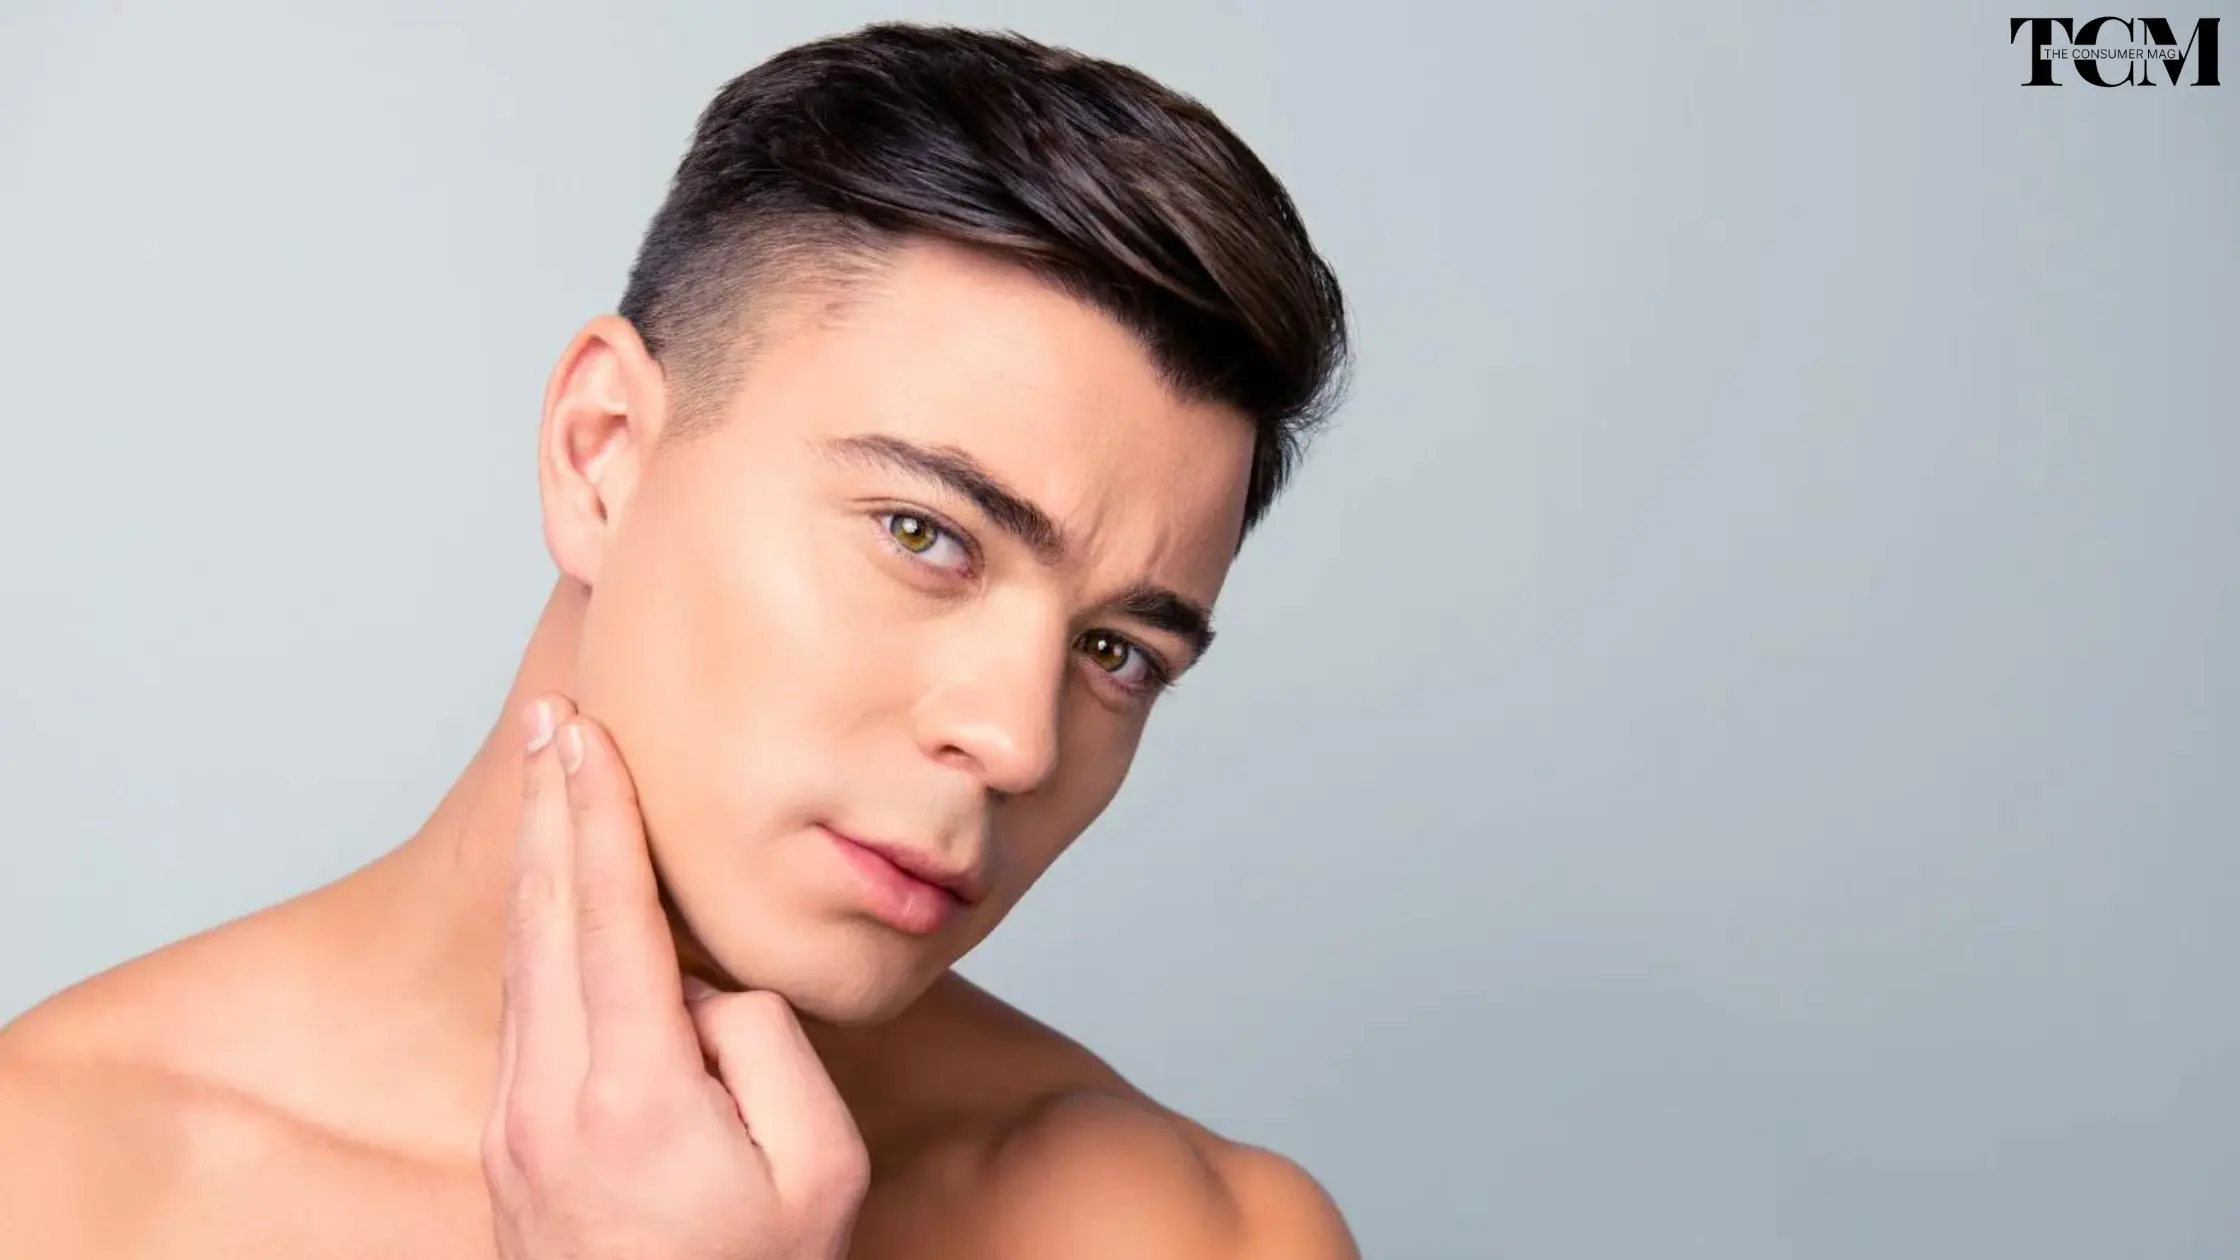 How to Get Clear and Healthy Skin: Men’s Skincare Tips and Tricks